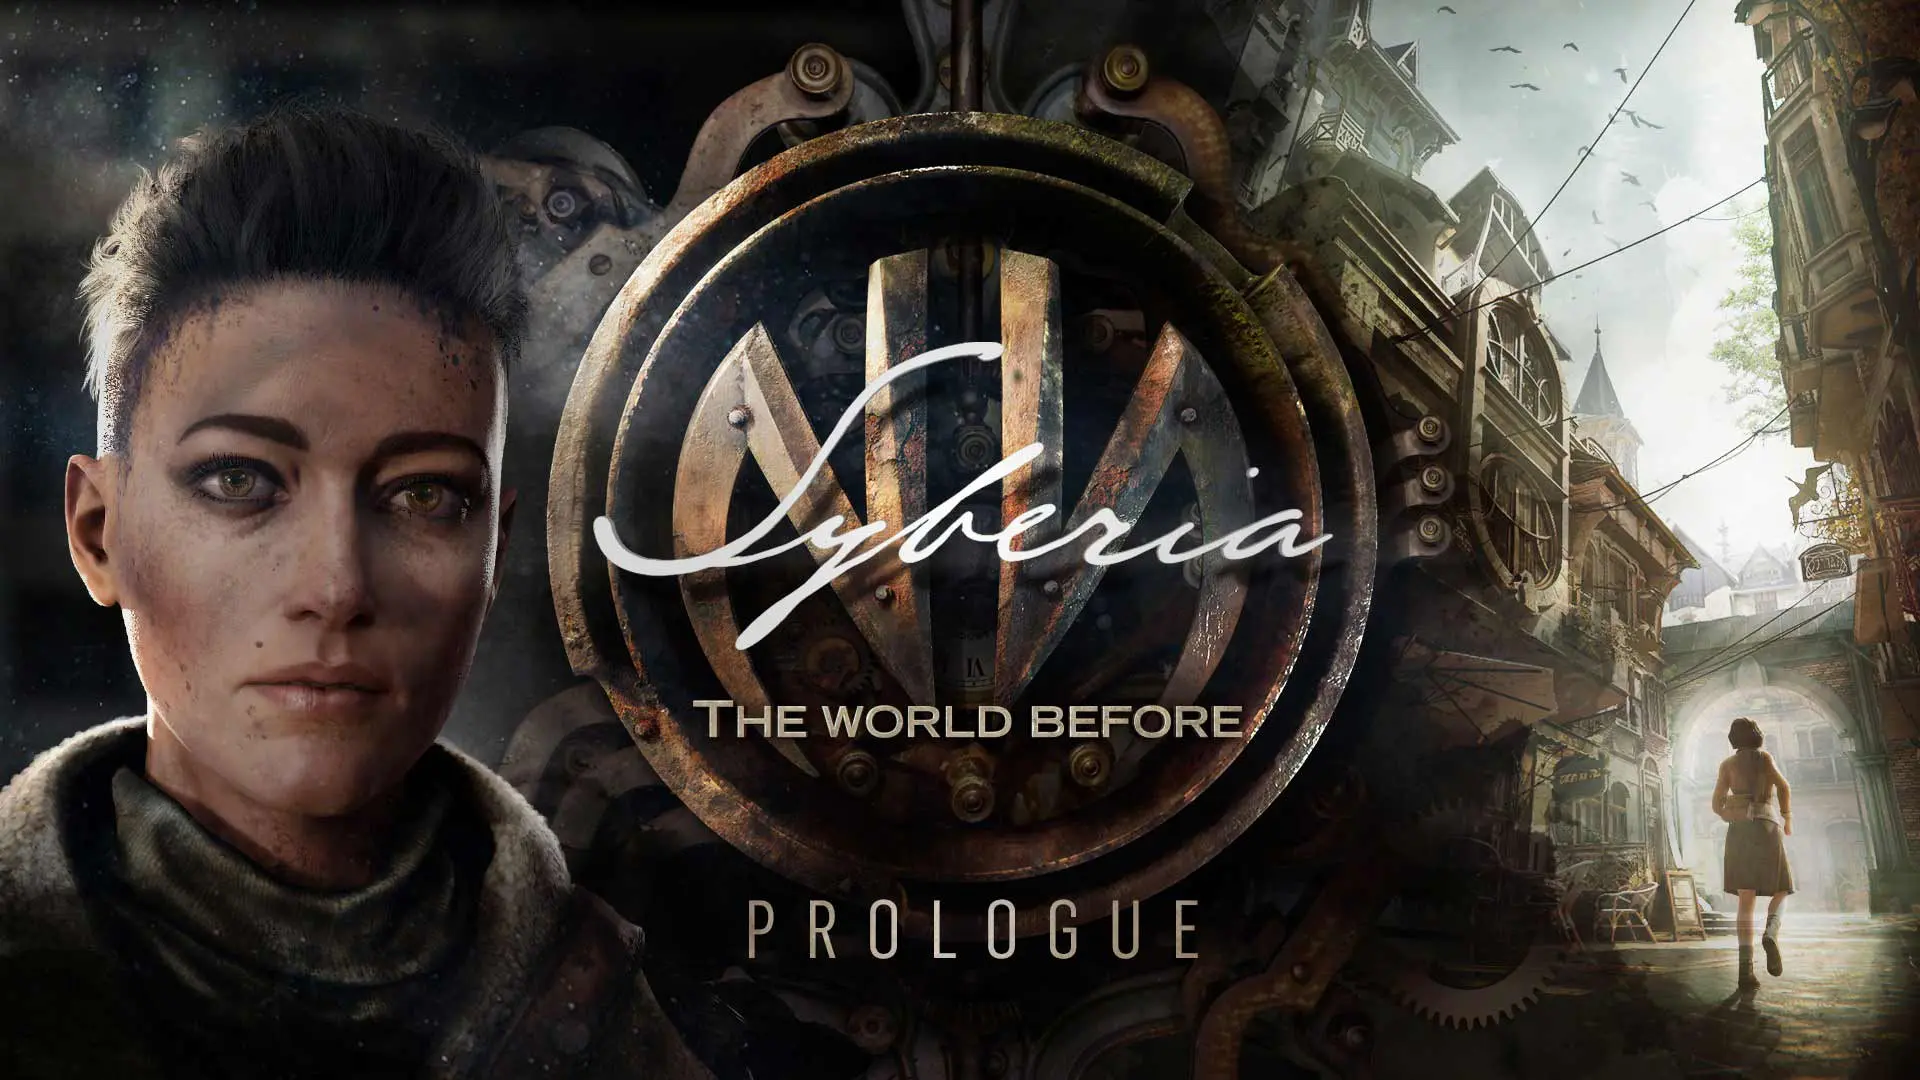 Syberia: The World Before Prologue demo